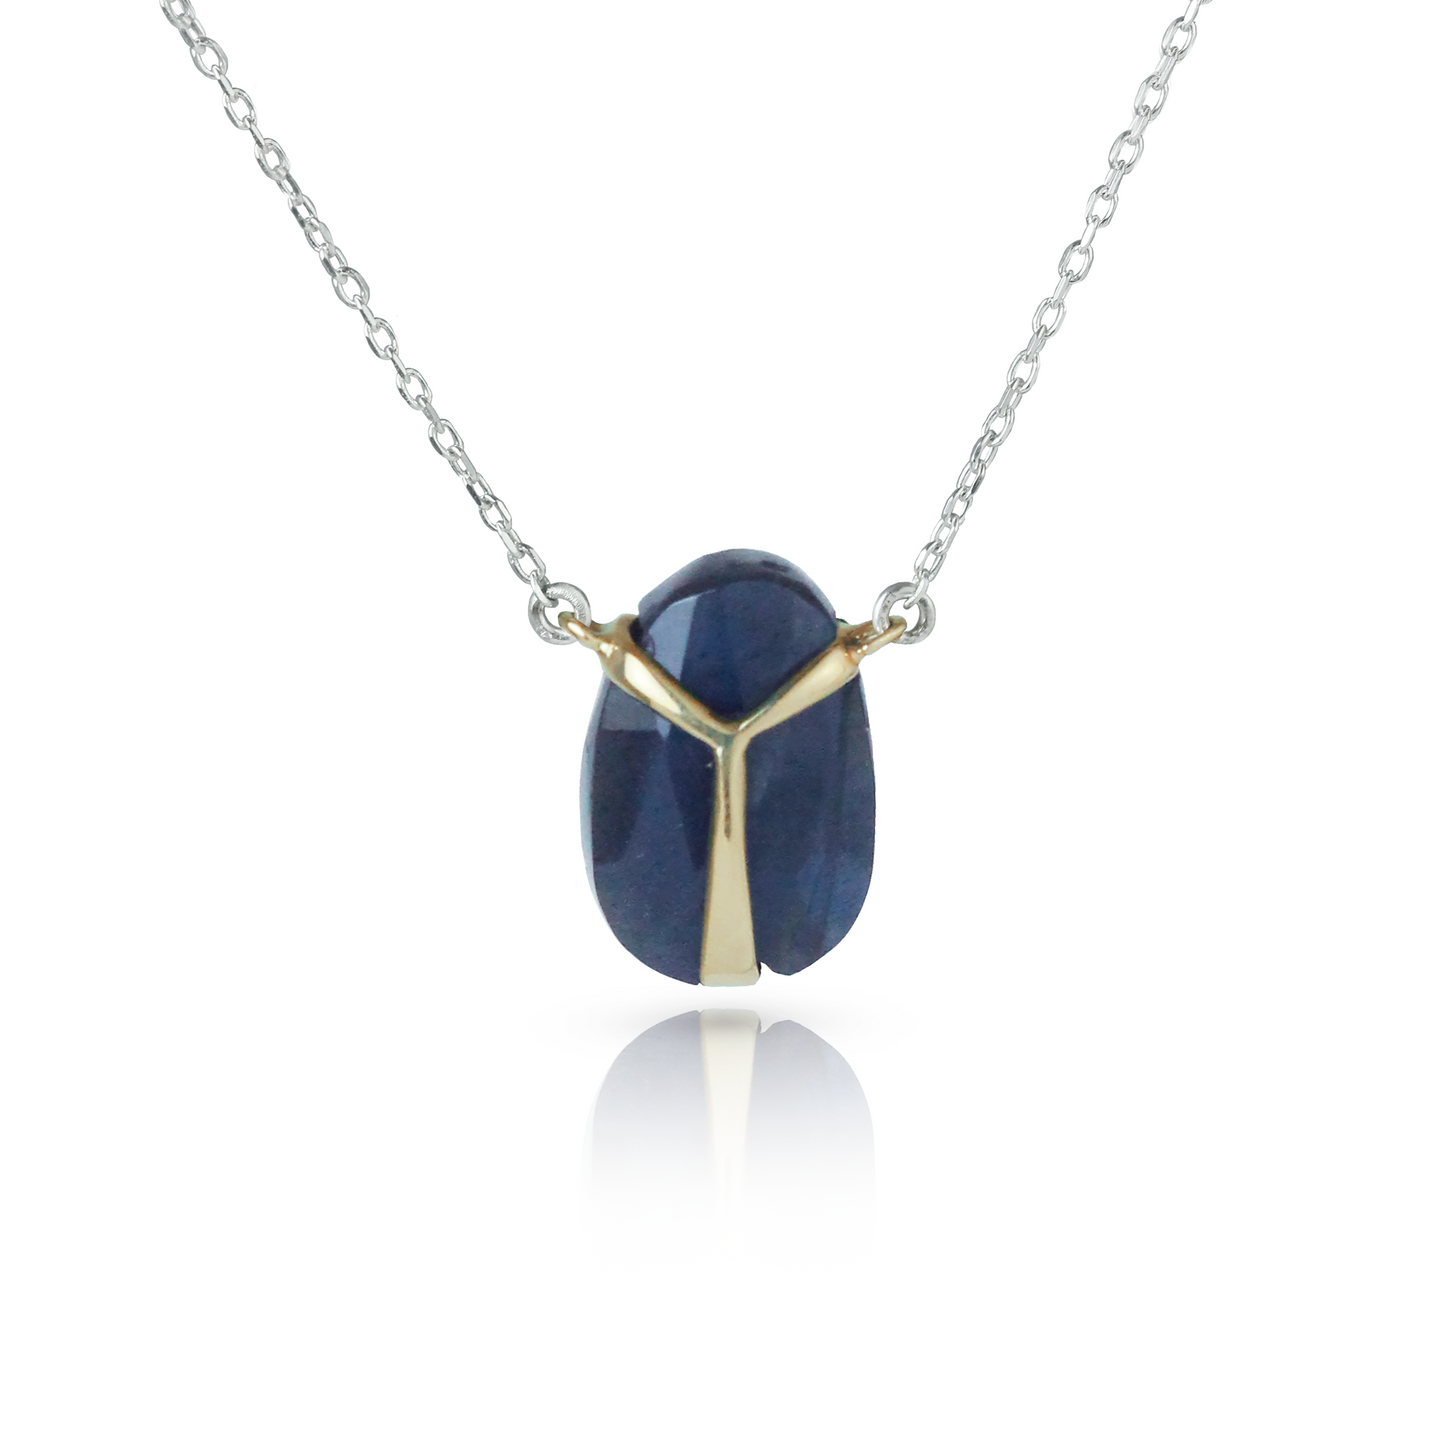 Lucky Scarab Pendant in 14k Gold and Labradorite on Sterling Silver Chain